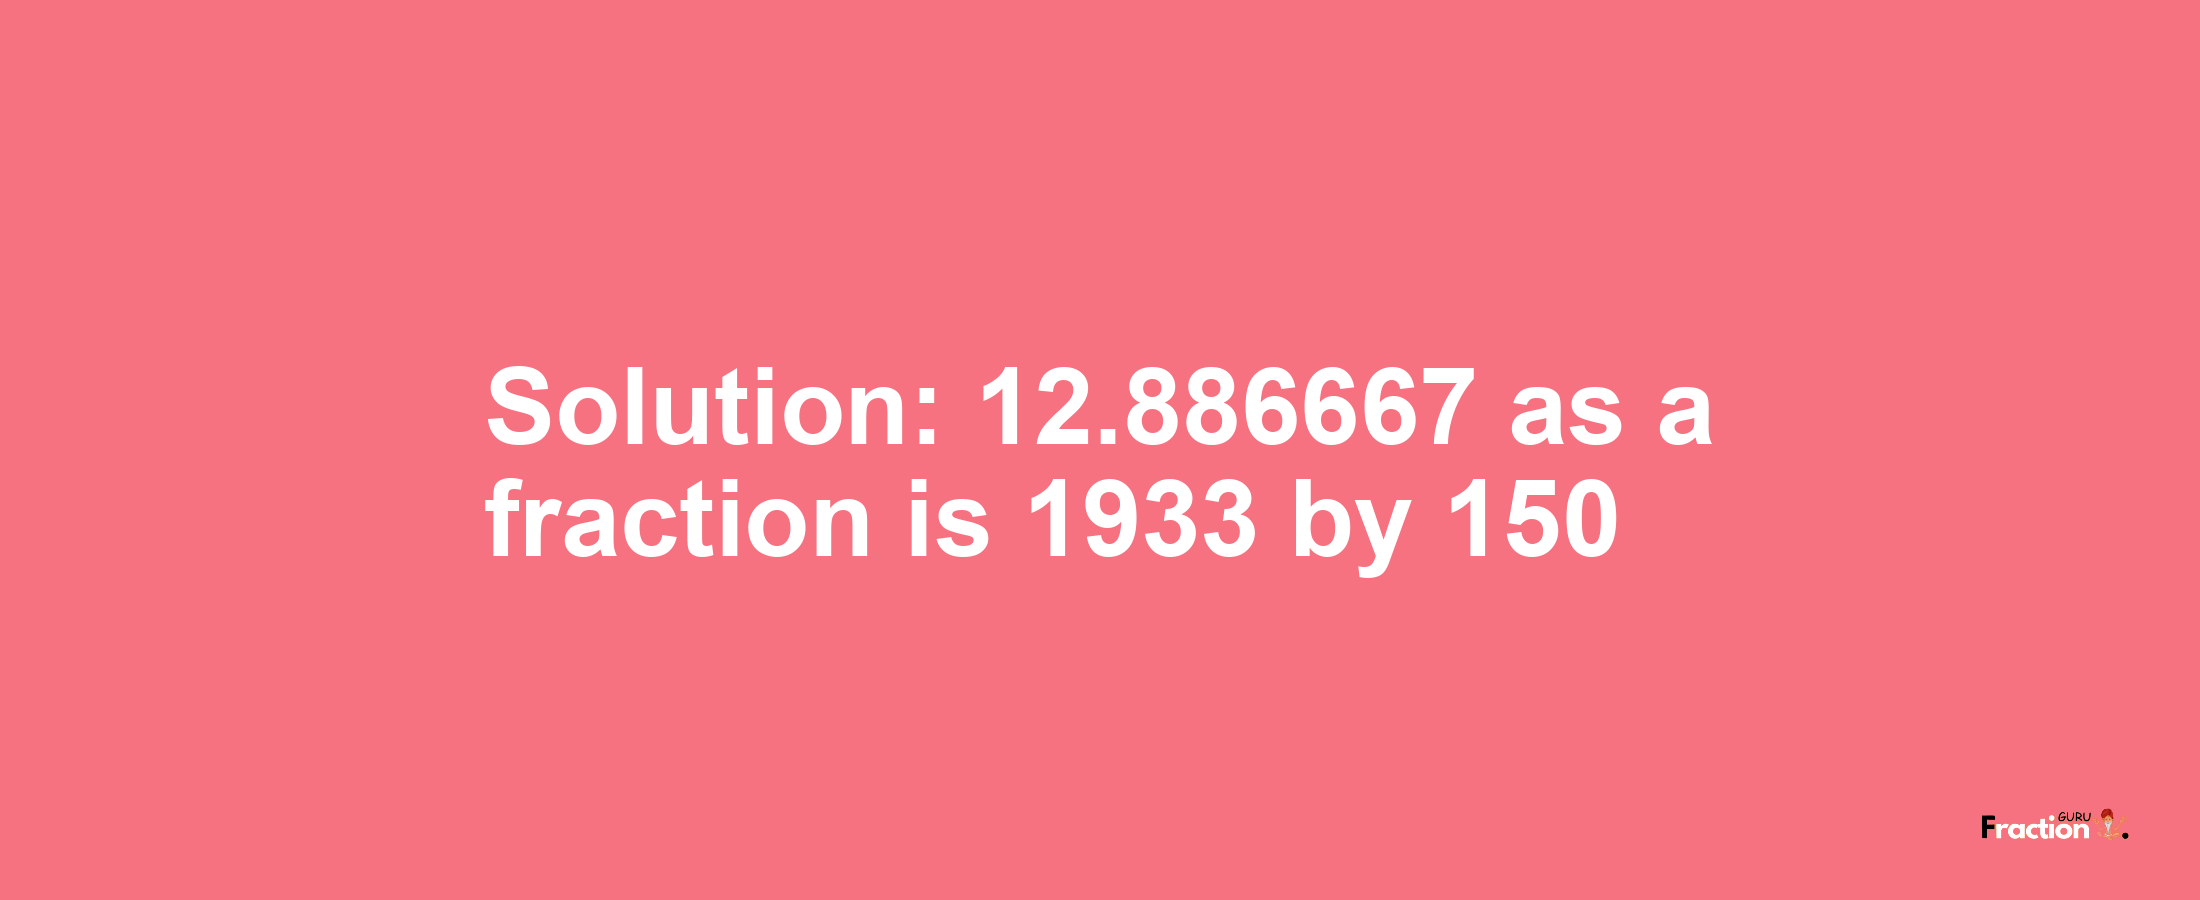 Solution:12.886667 as a fraction is 1933/150